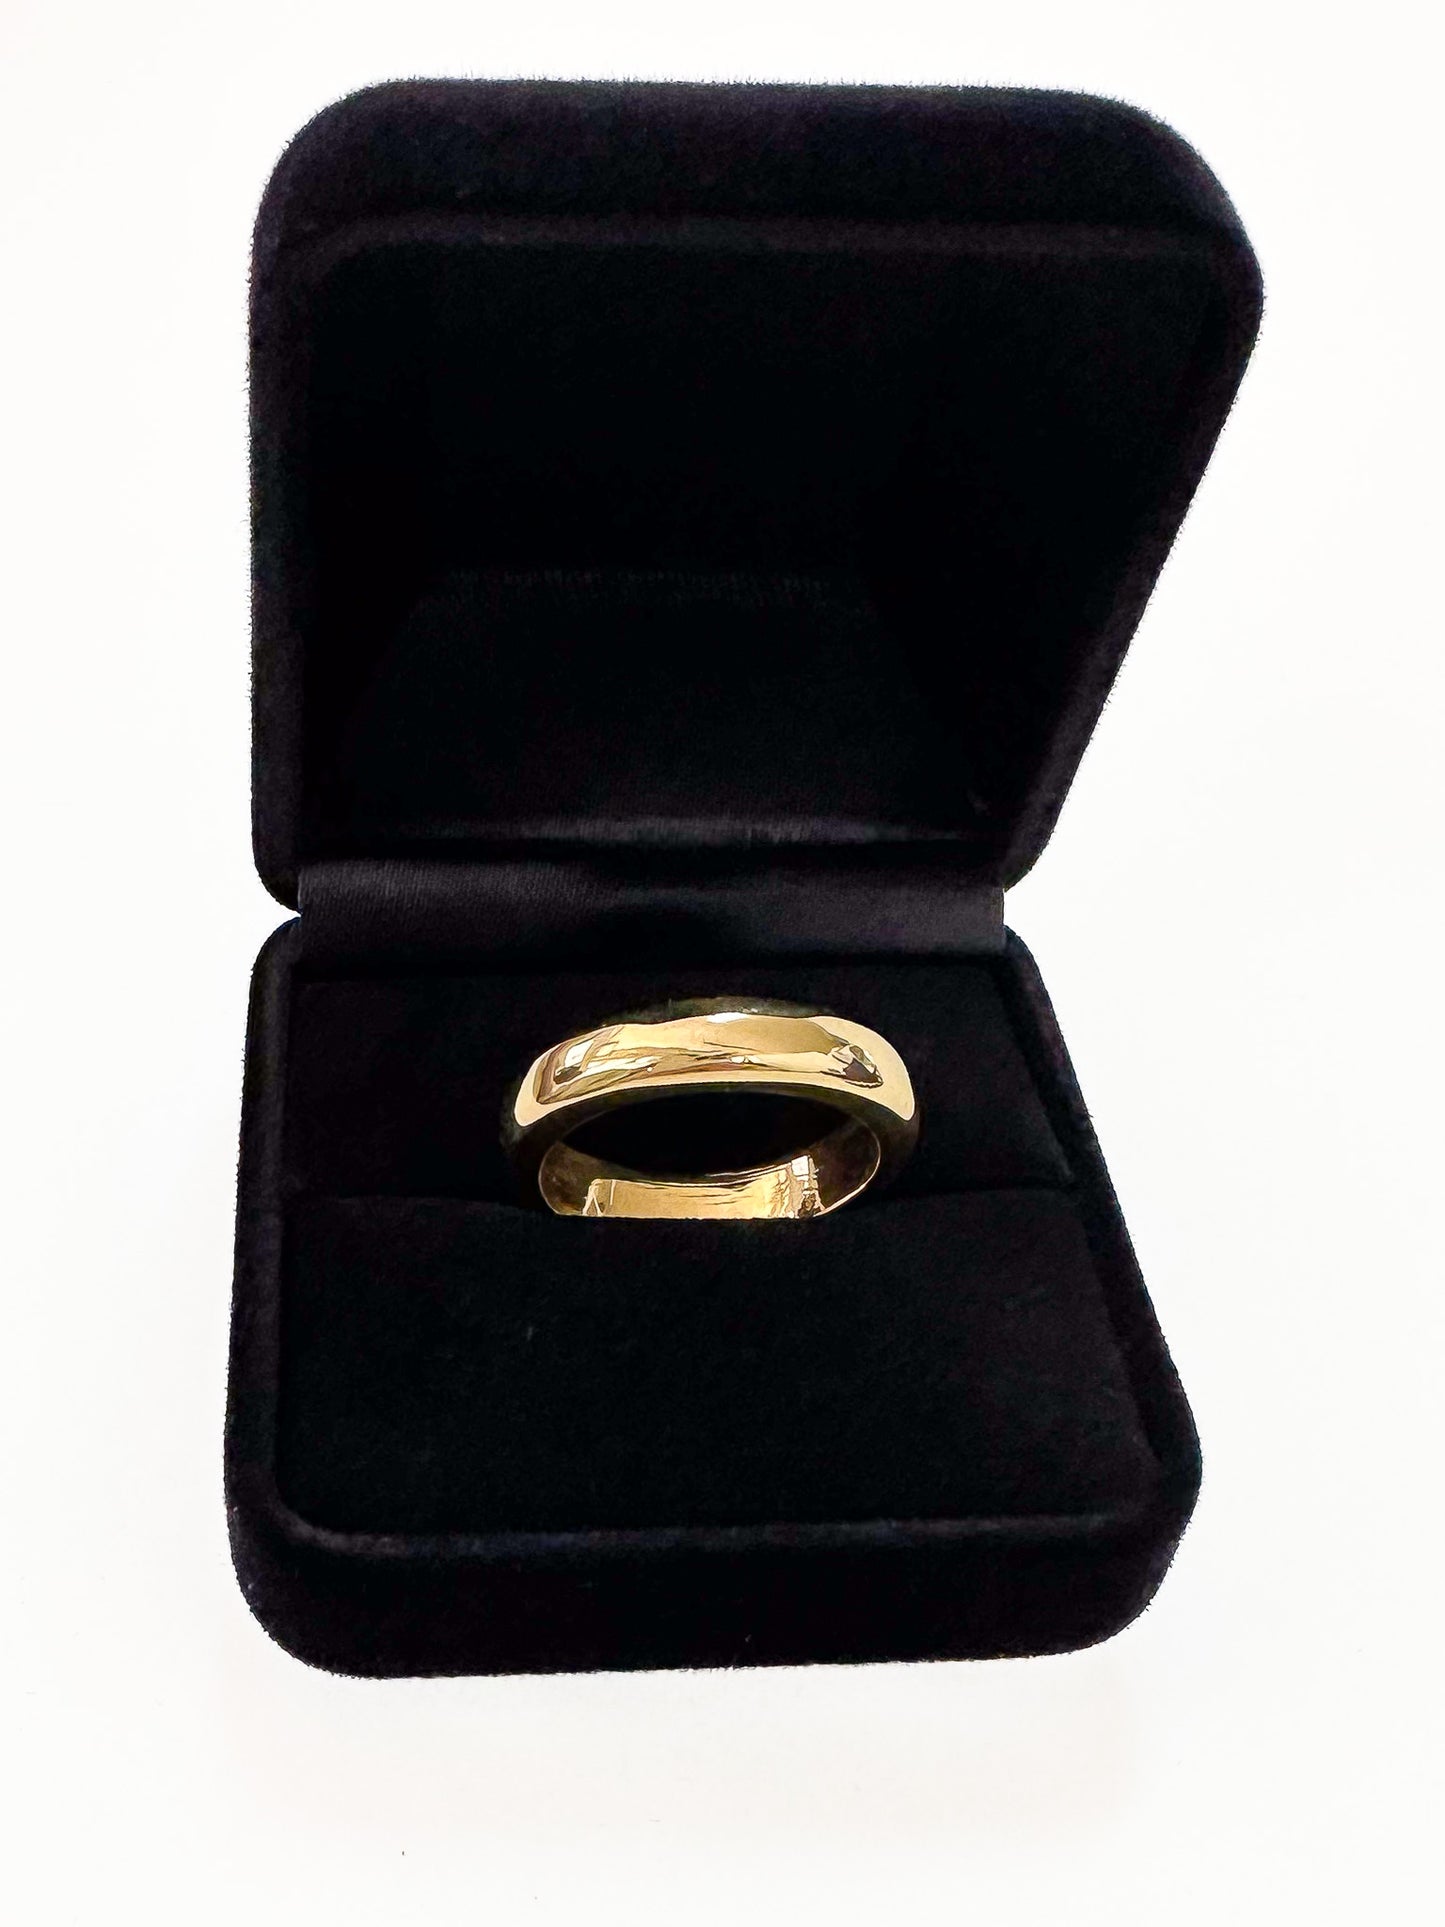 The ideal plain-band ring.  Key Features:  Versatile Design: This half round ring is a chameleon of style, ready to stand out solo or layer up. Its chunky, weighty feel adds substance to your ensemble. Width & weight: 4mm , average 7g (9ct) & 9g (18ct) Precious Metal Options: Available in solid 9ct or 18ct yellow gold, it serves as an ideal wedding band or addition to your everyday stack. 